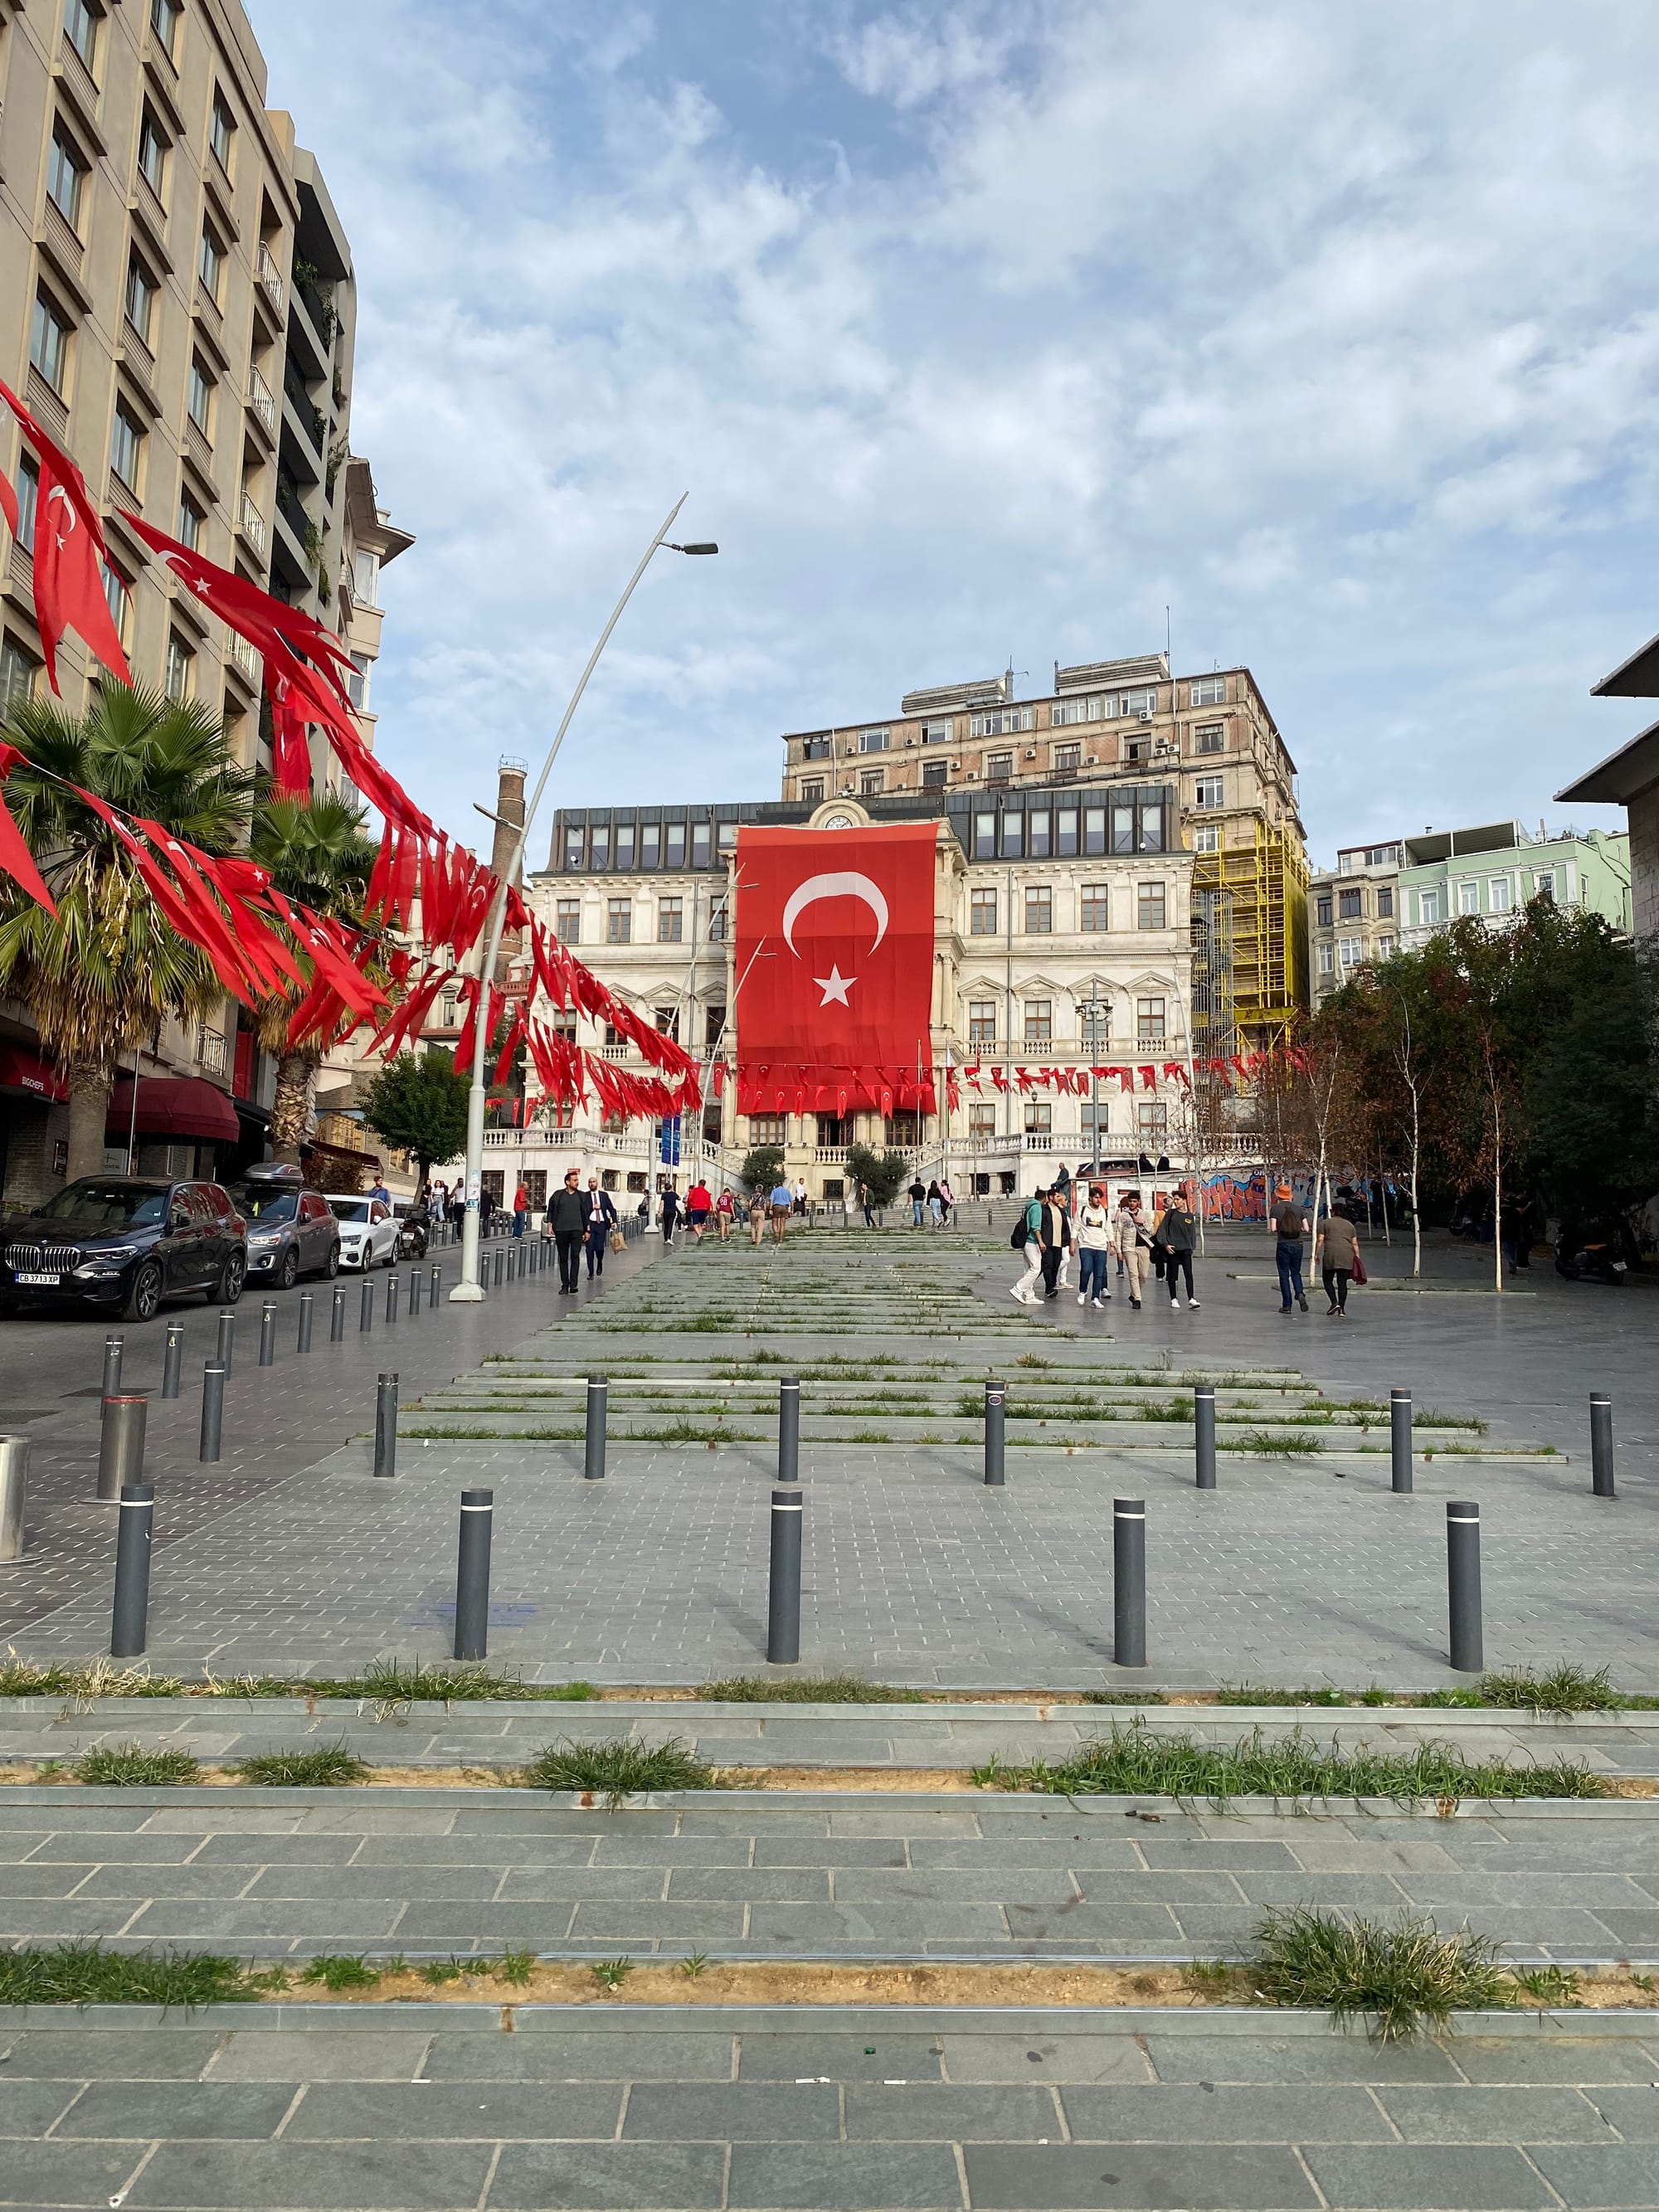 The Charm of Istanbul (Part I)